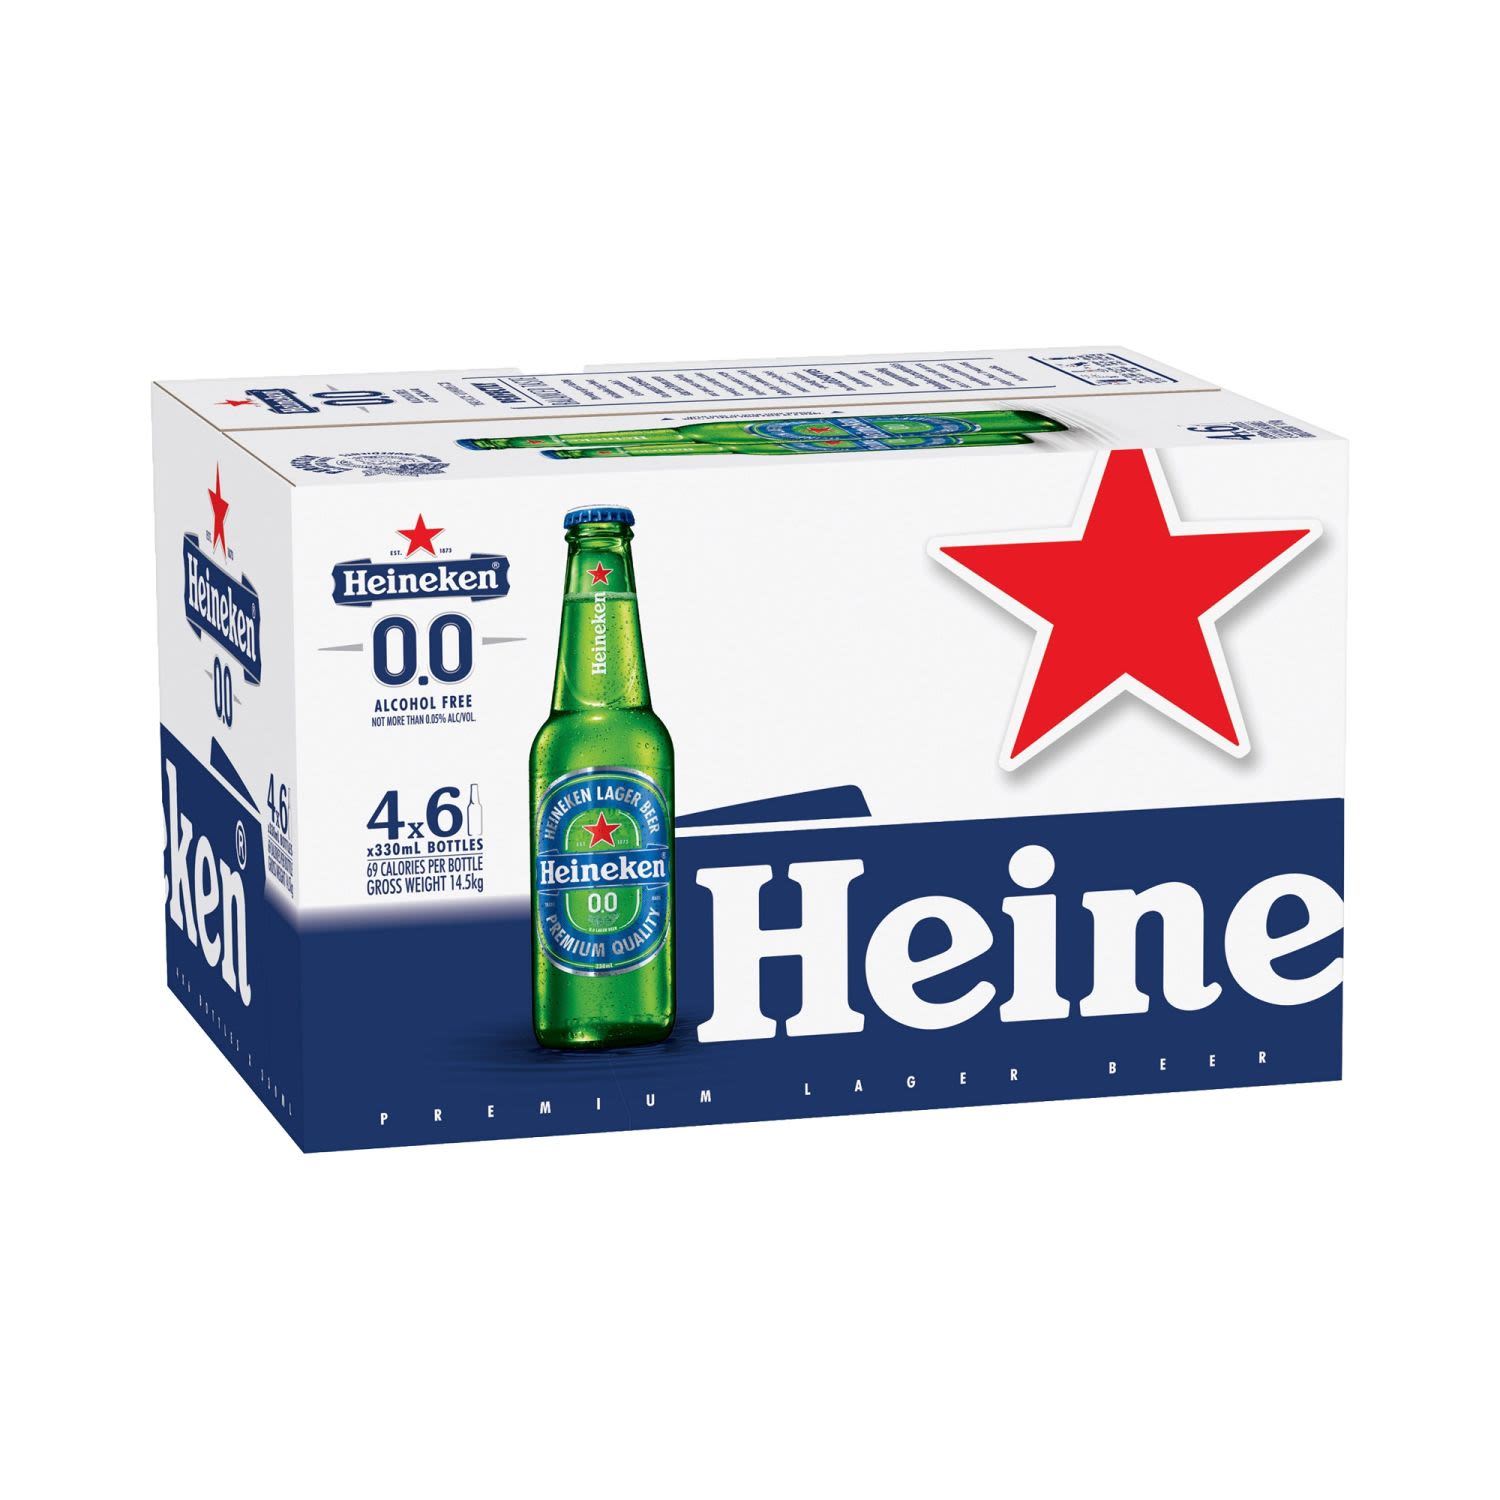 "Heineken unique 0.0 recipe is  brewed with pure malt and special  A-Yeast, just like the original Heineken  lager beer. Heineken 0.0 - a natural,  pure malt lager for a premium taste, without alcohol. "<br /> <br />Alcohol Volume: 0.00%<br /><br />Pack Format: 24 Pack<br /><br />Standard Drinks: 0</br /><br />Pack Type: Bottle<br /><br />Country of Origin: Netherlands<br />